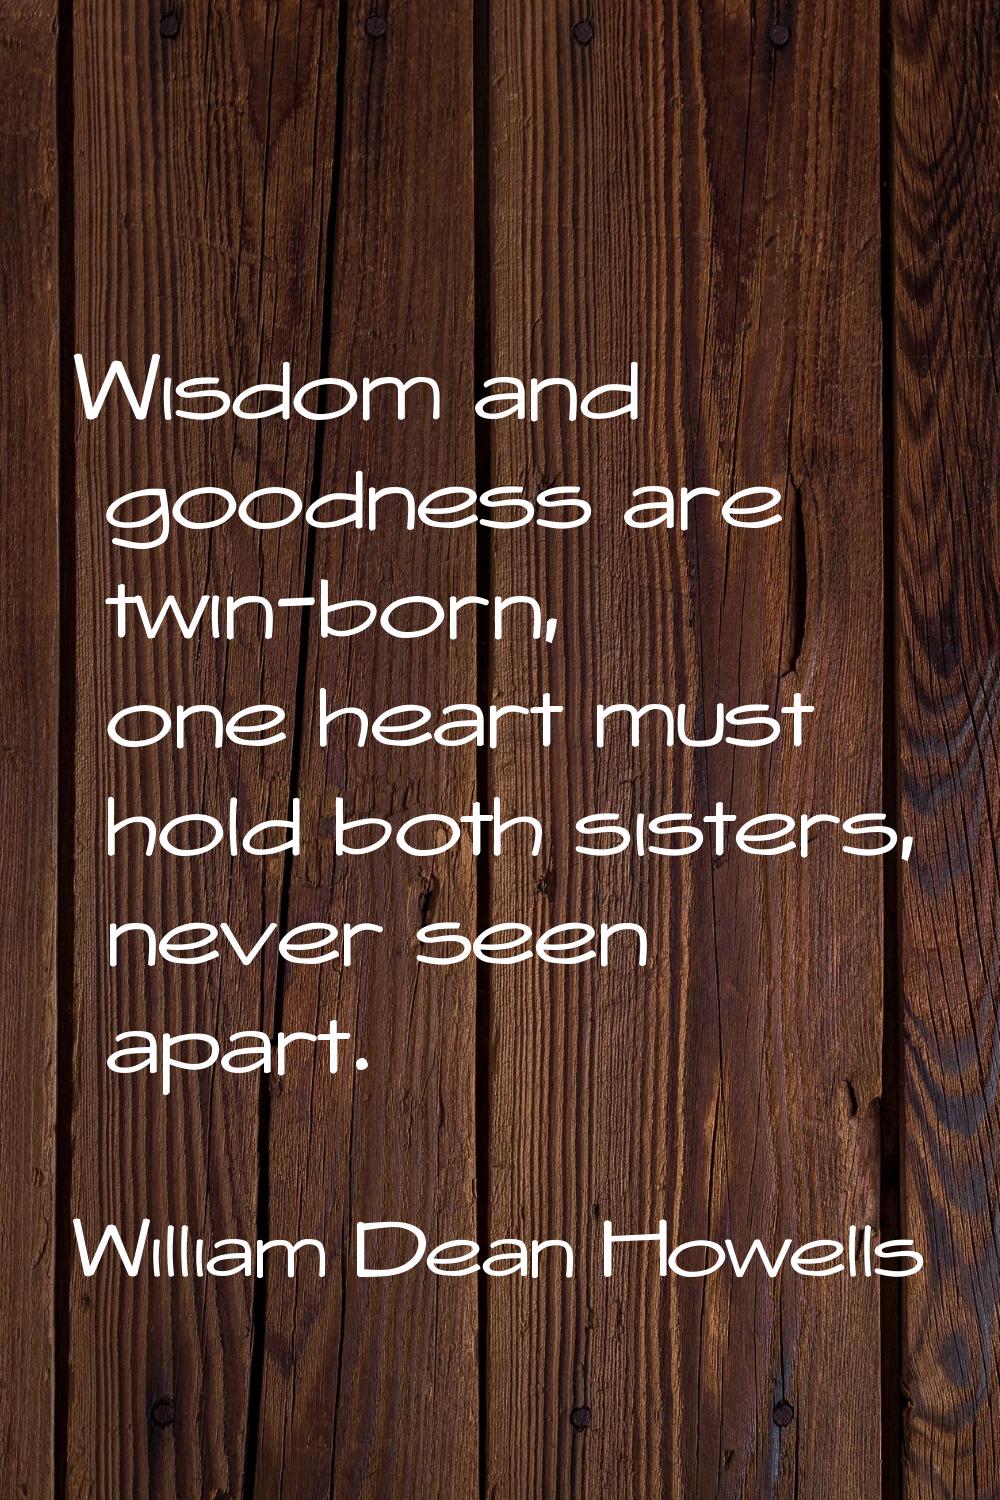 Wisdom and goodness are twin-born, one heart must hold both sisters, never seen apart.